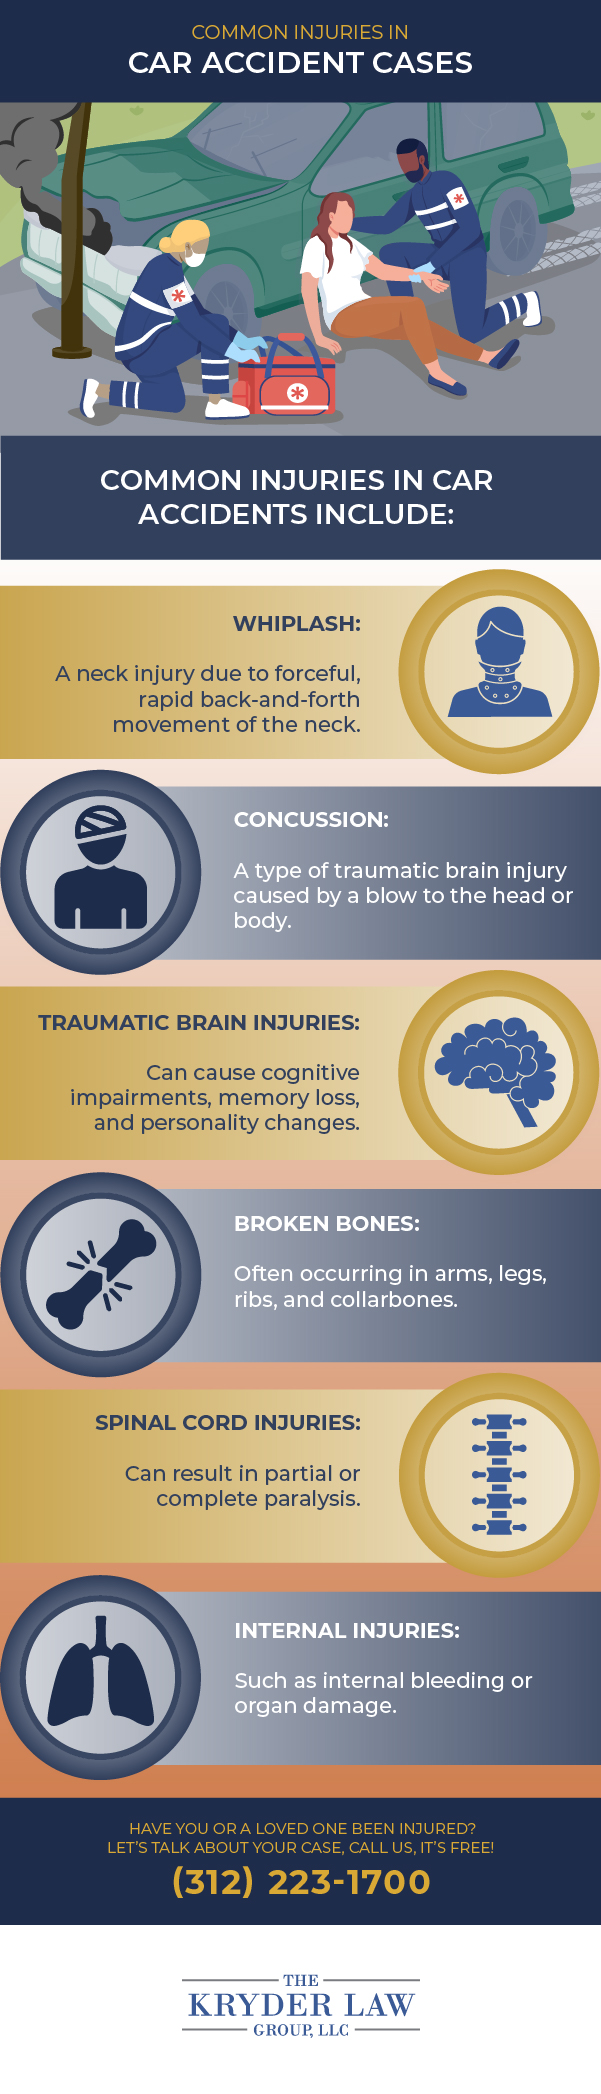 Common Injuries in Car Accident Cases